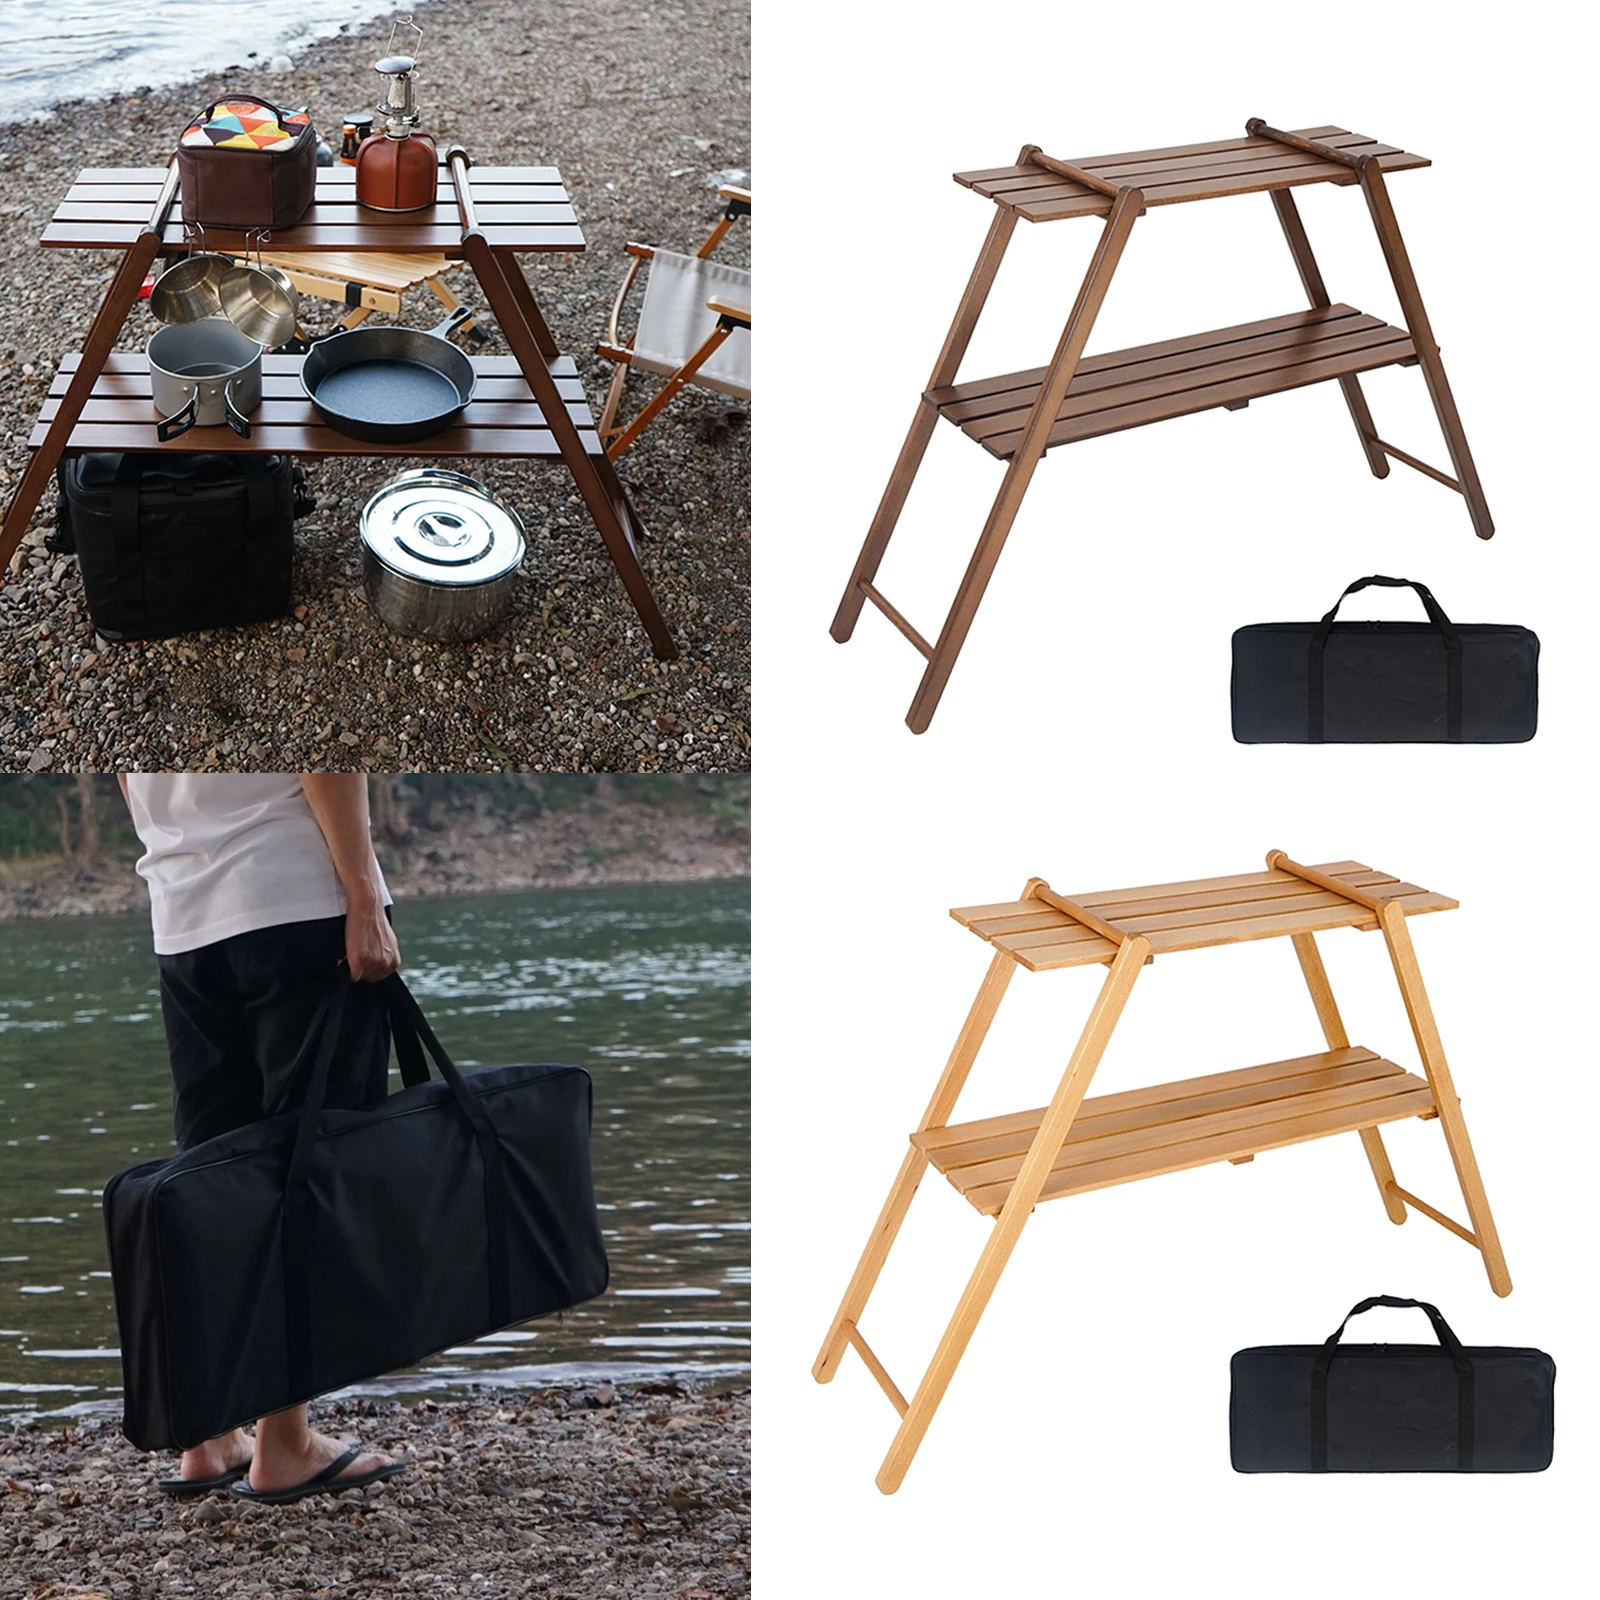 Outdoor 2 Layer Storage Stand Portable Foldable Multi-layer Shelf Camping Picnic Folding Table Hiking Picnic Bamboo Tool Rack